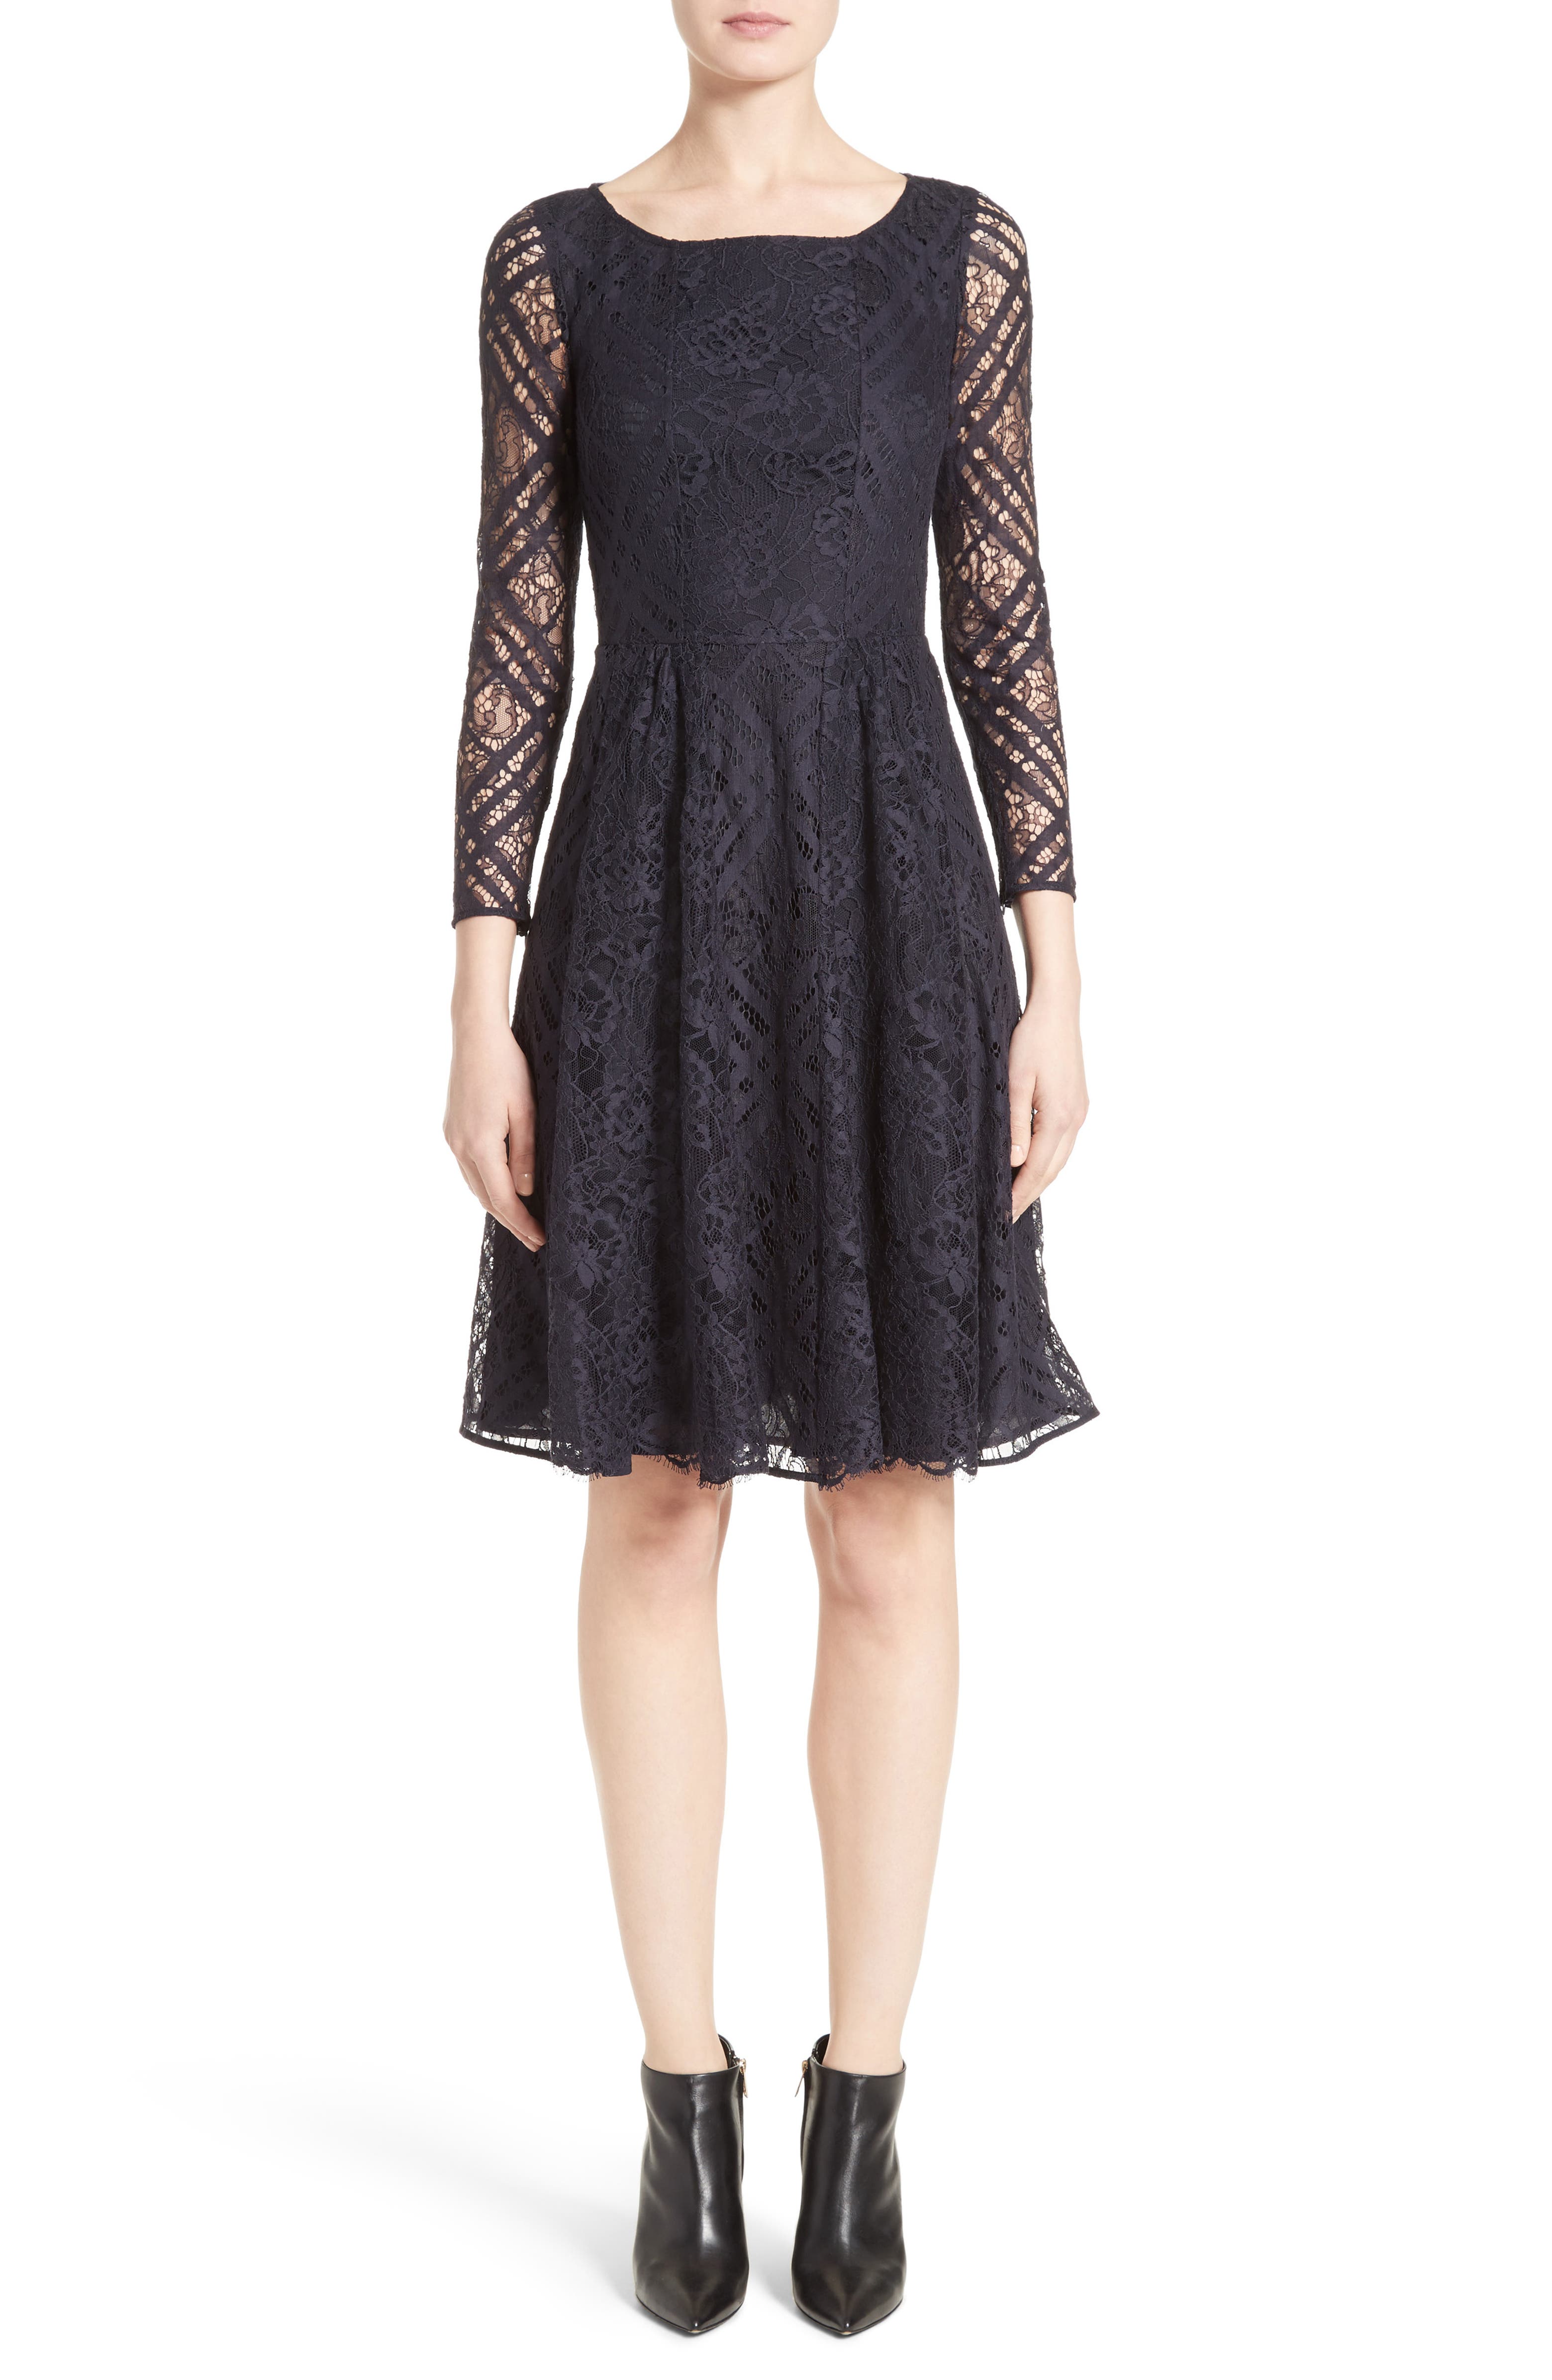 Burberry Liliana Lace Fit & Flare Dress | Nordstrom